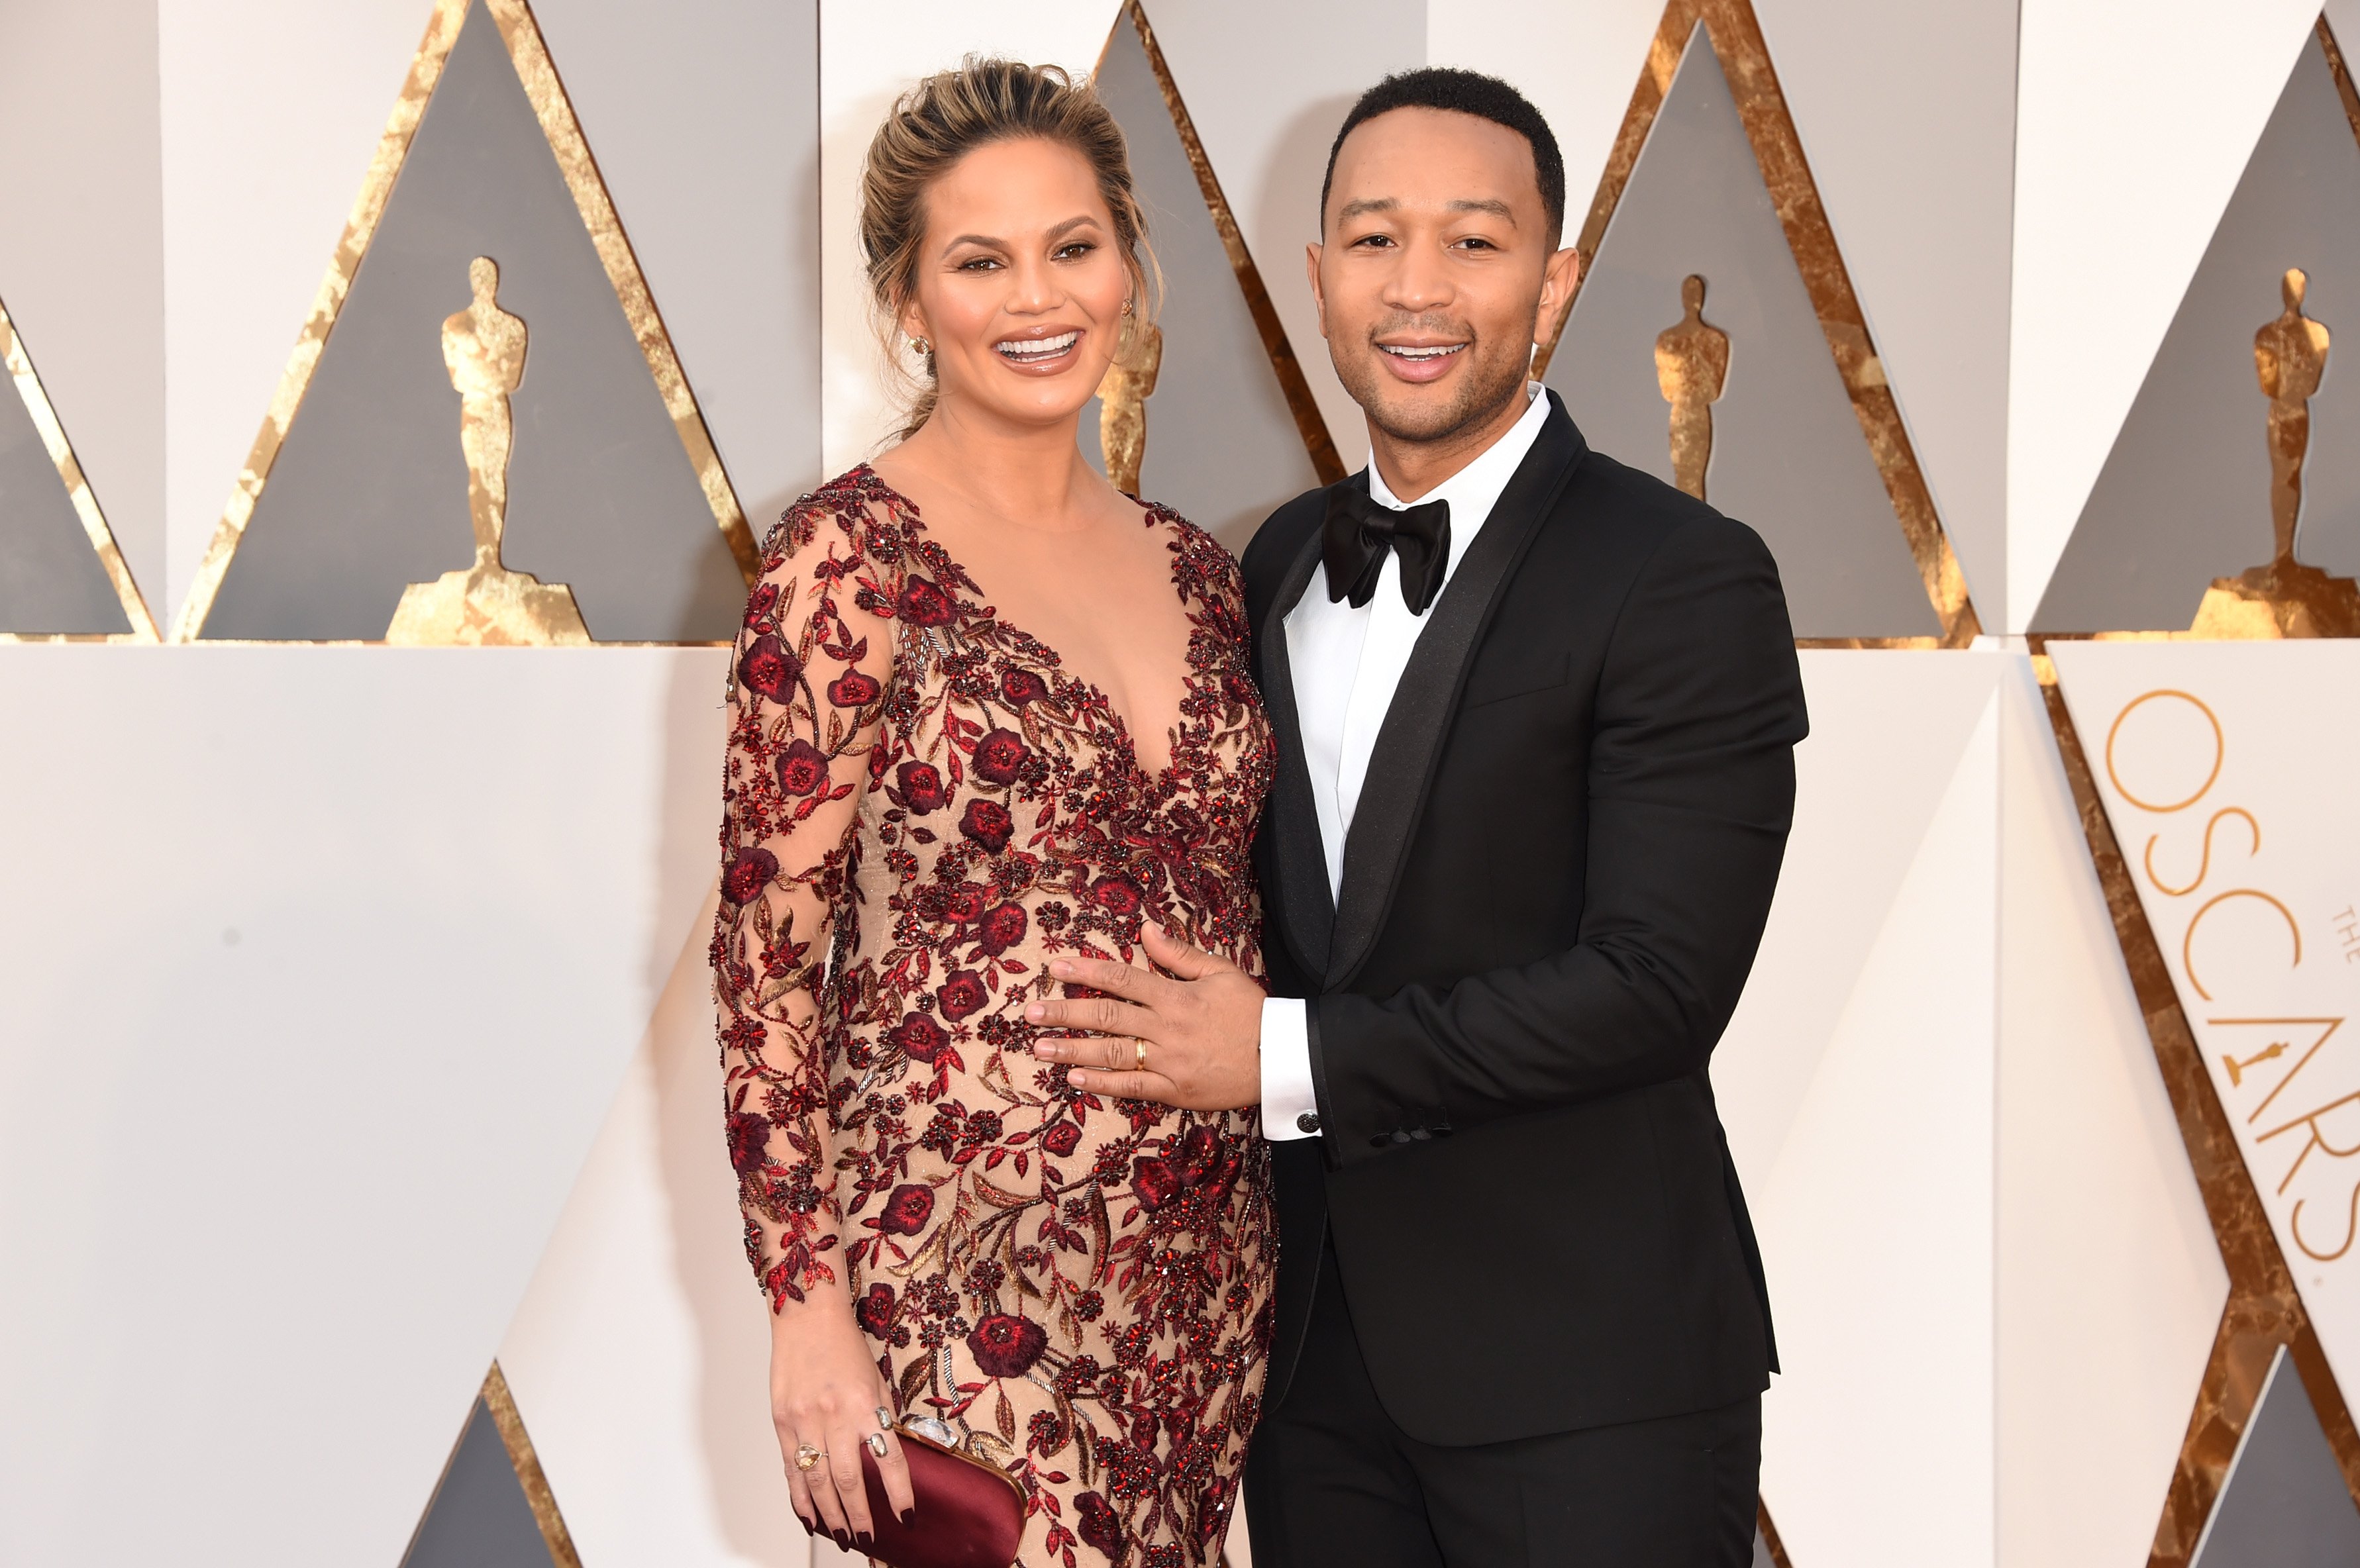 Model Chrissy Teigen and "Ordinary People" singer John Legend attend the 88th Academy Awards in 2016 in Hollywood City, California. | Photo: Getty Images